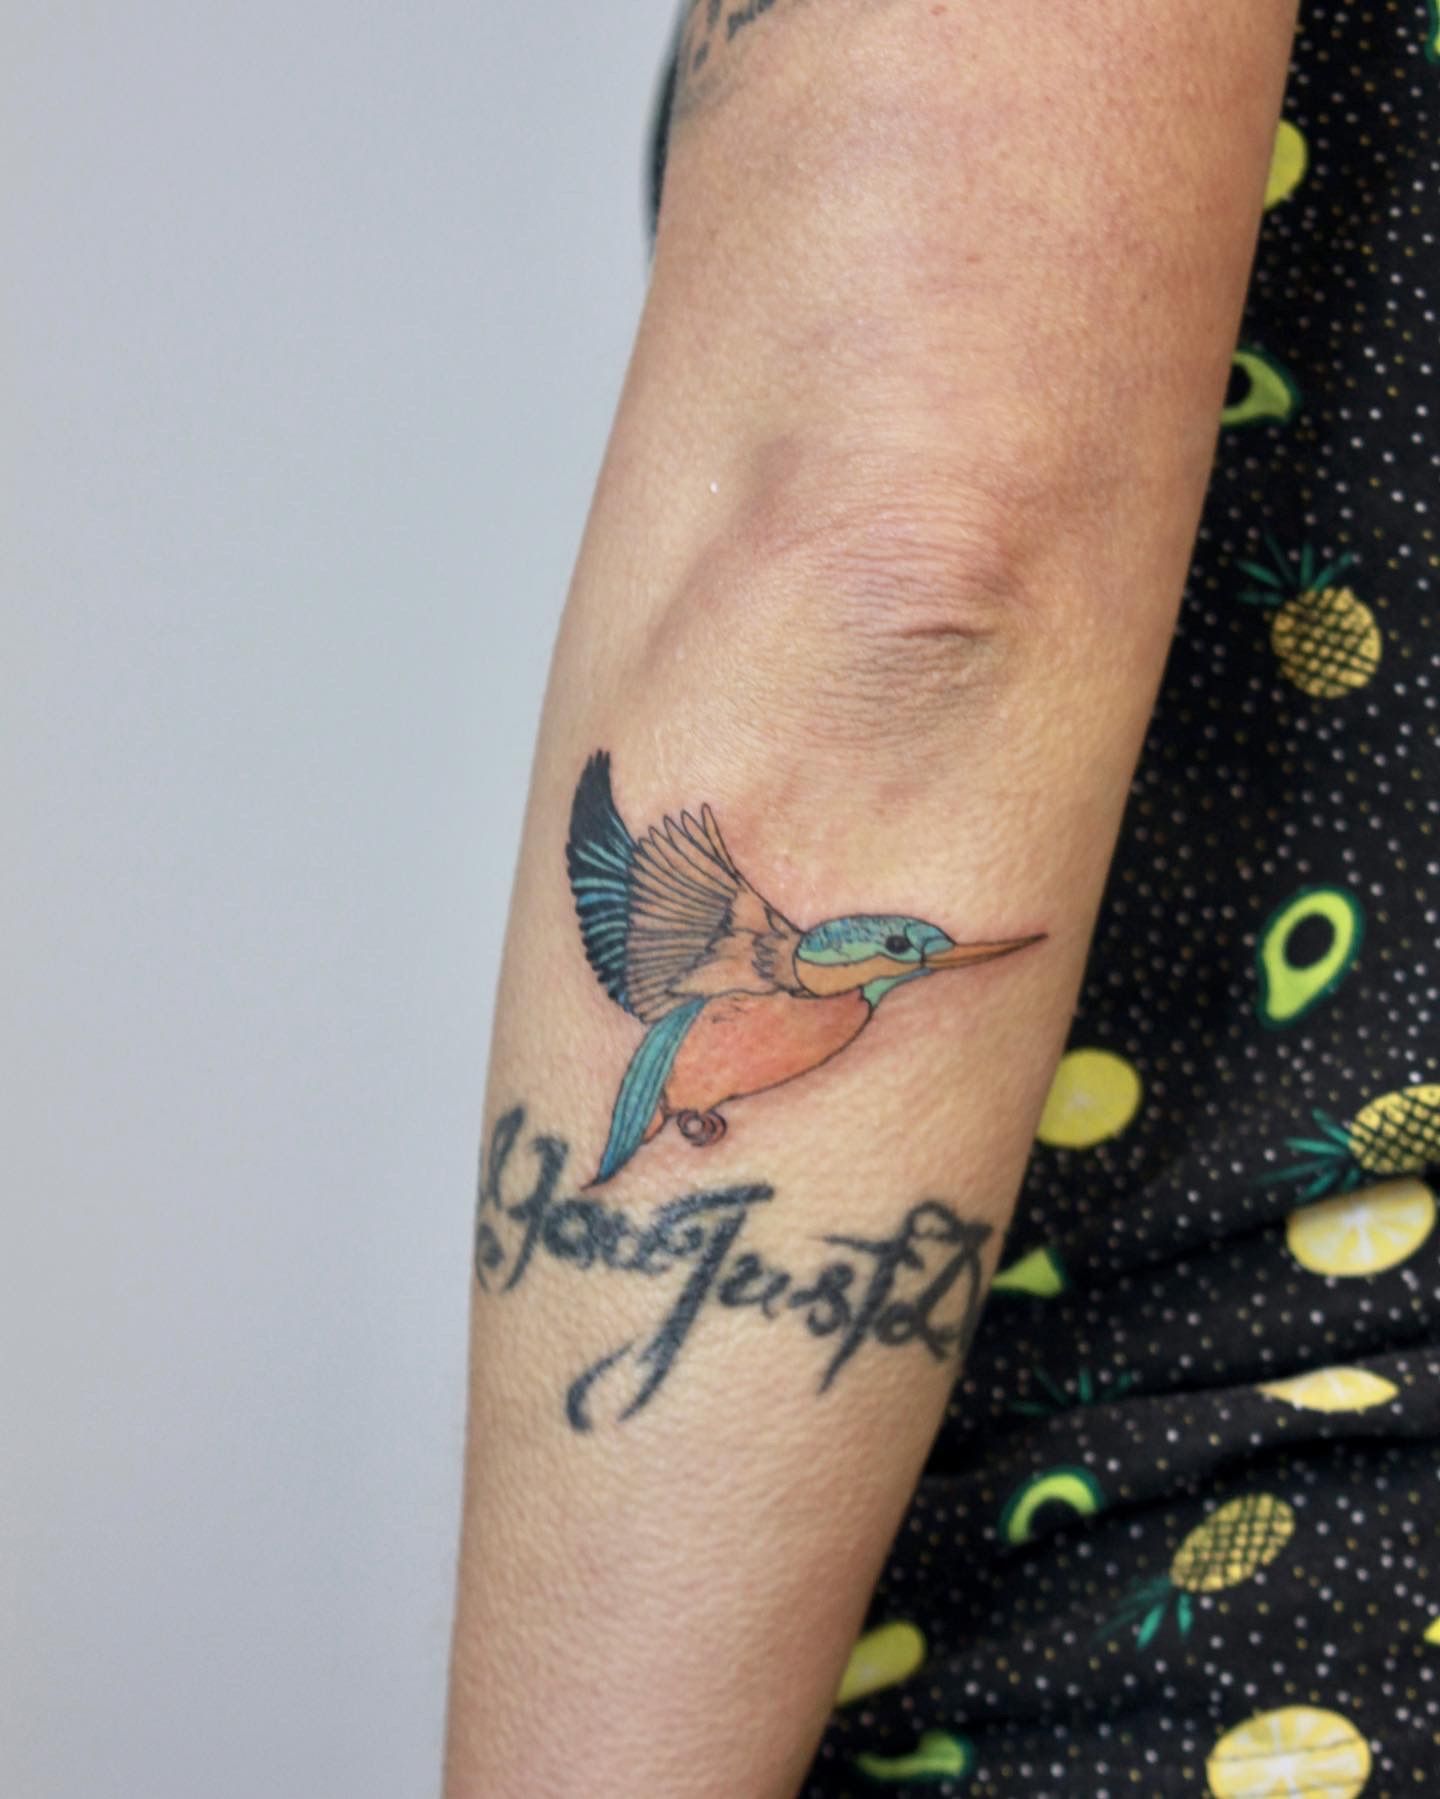 Tattoo tagged with: small, kingfisher, animal, watercolor, tiny, bird,  adrianbascur, ifttt, little, inner forearm, medium size, sketch work |  inked-app.com